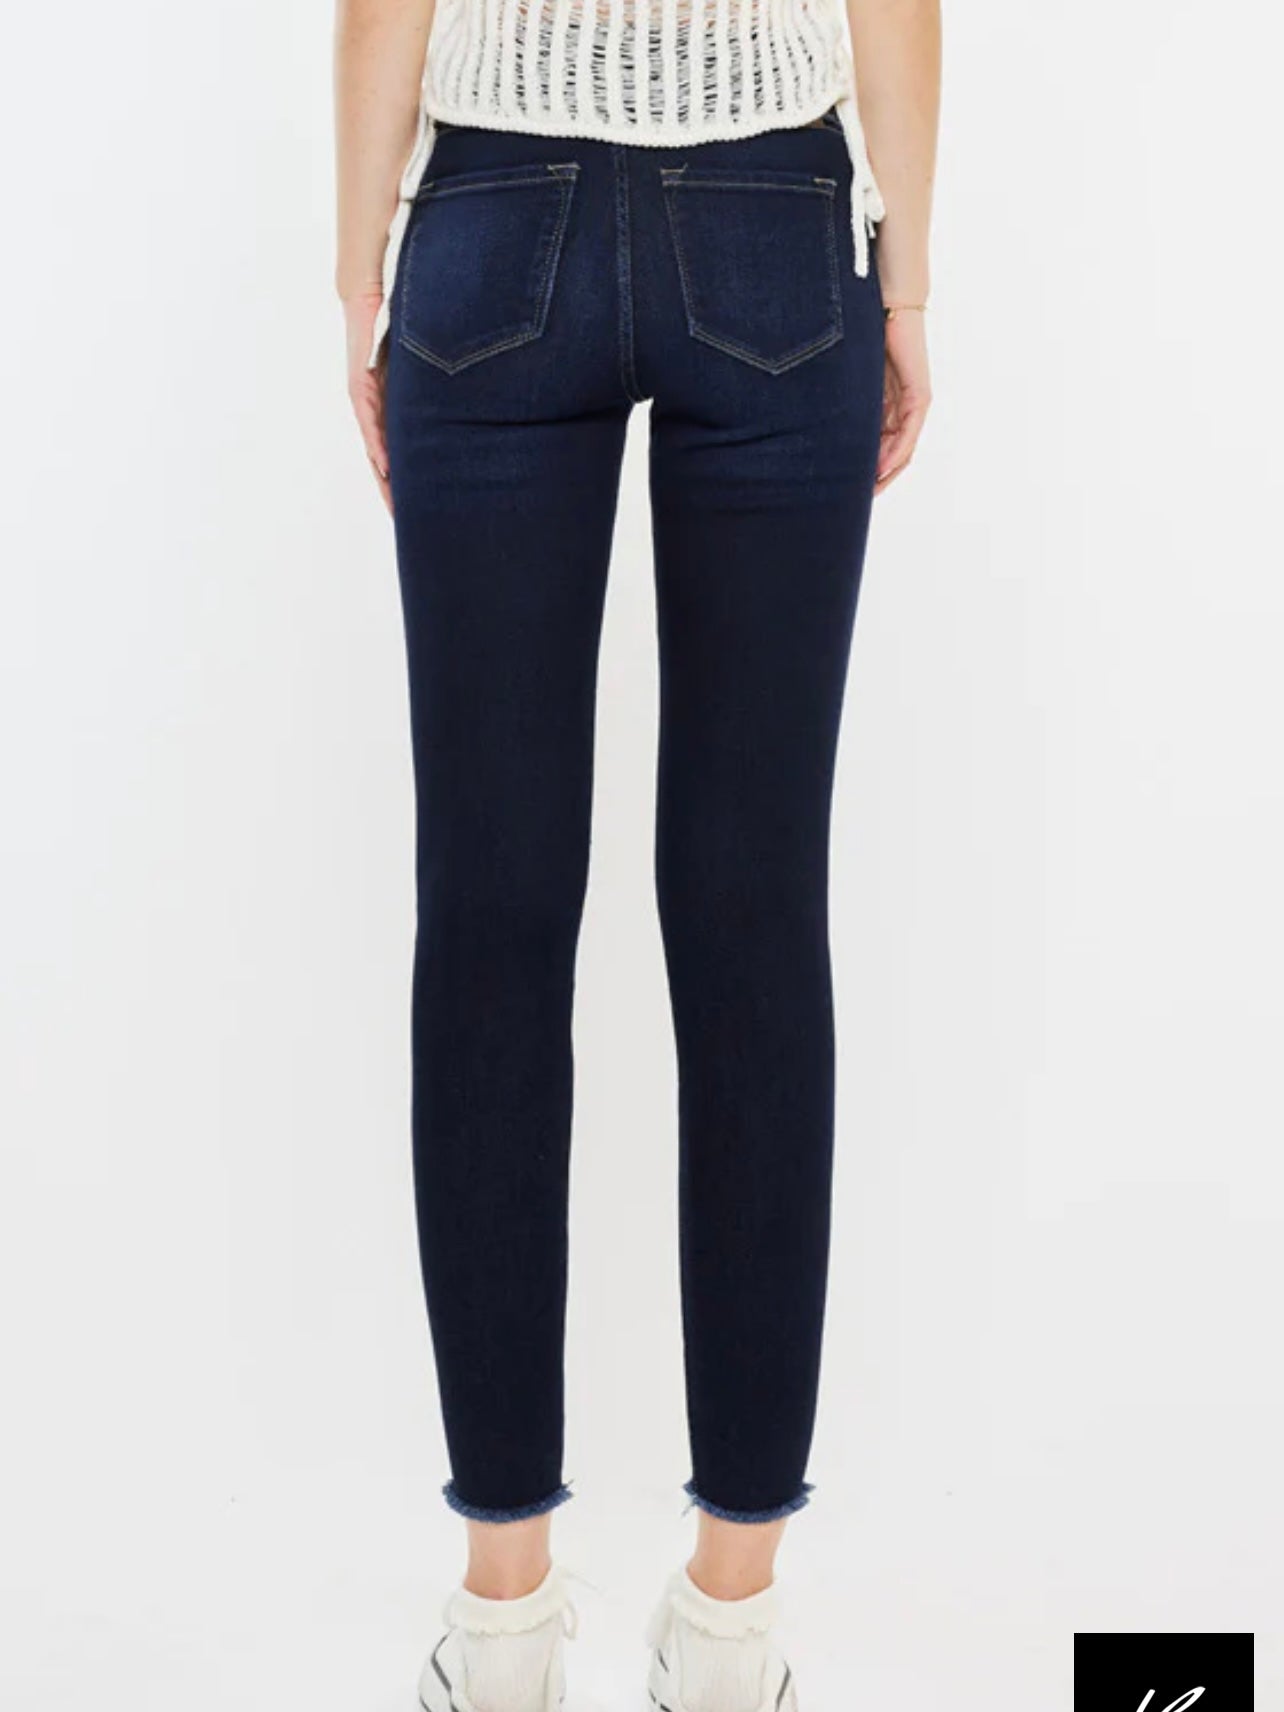 The Hadlee High Rise Ankle Skinny Jeans